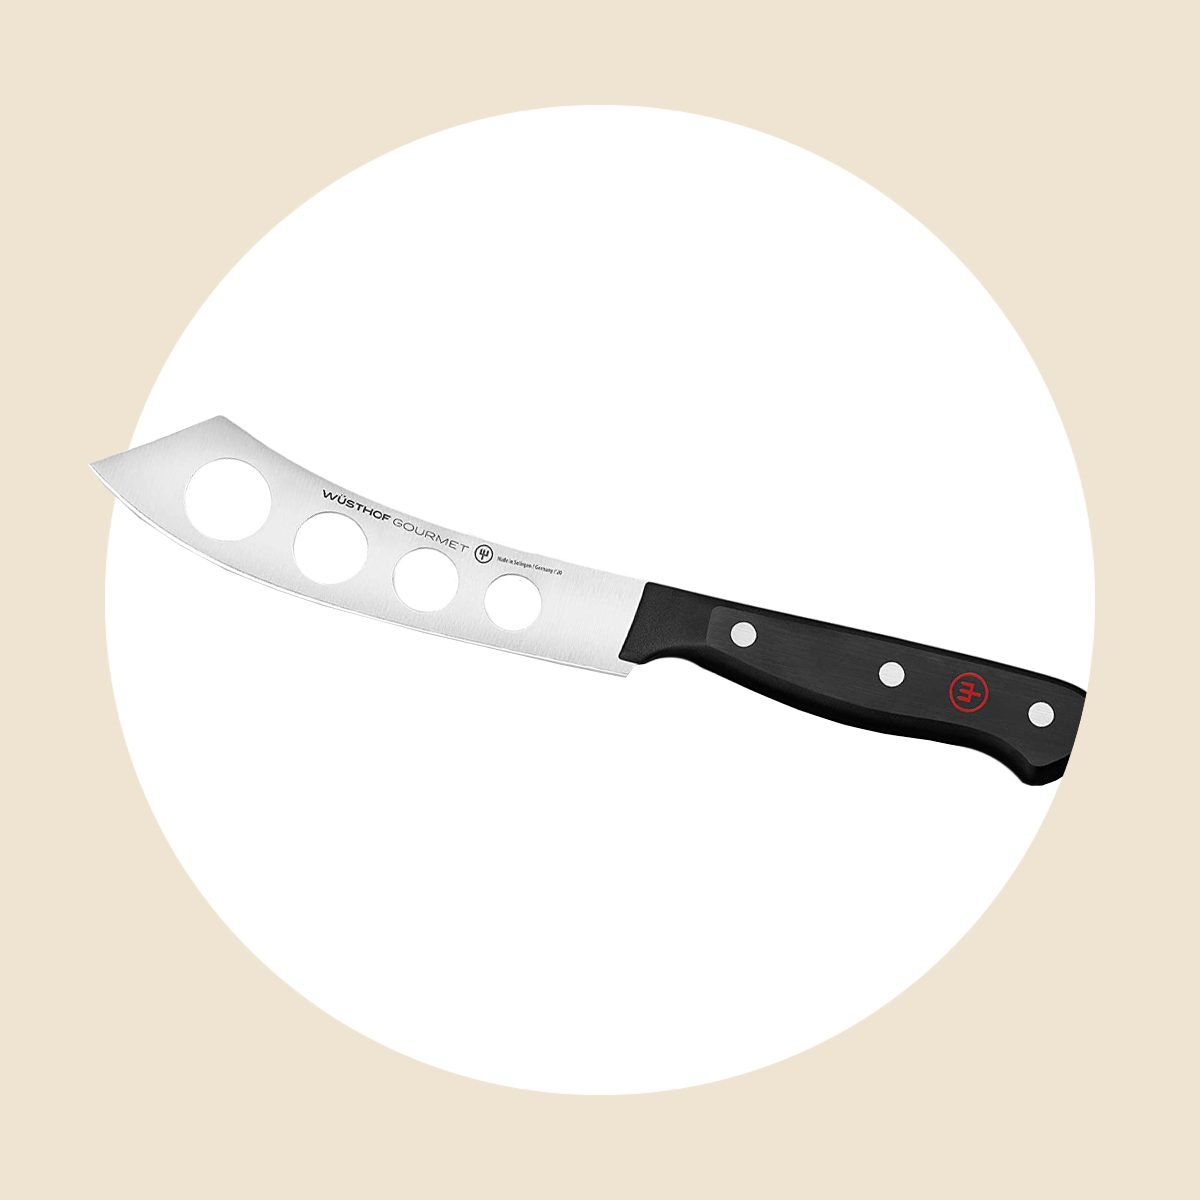 https://www.tasteofhome.com/wp-content/uploads/2021/10/The-Soft-Cheese-Knife-.jpg?fit=700%2C700